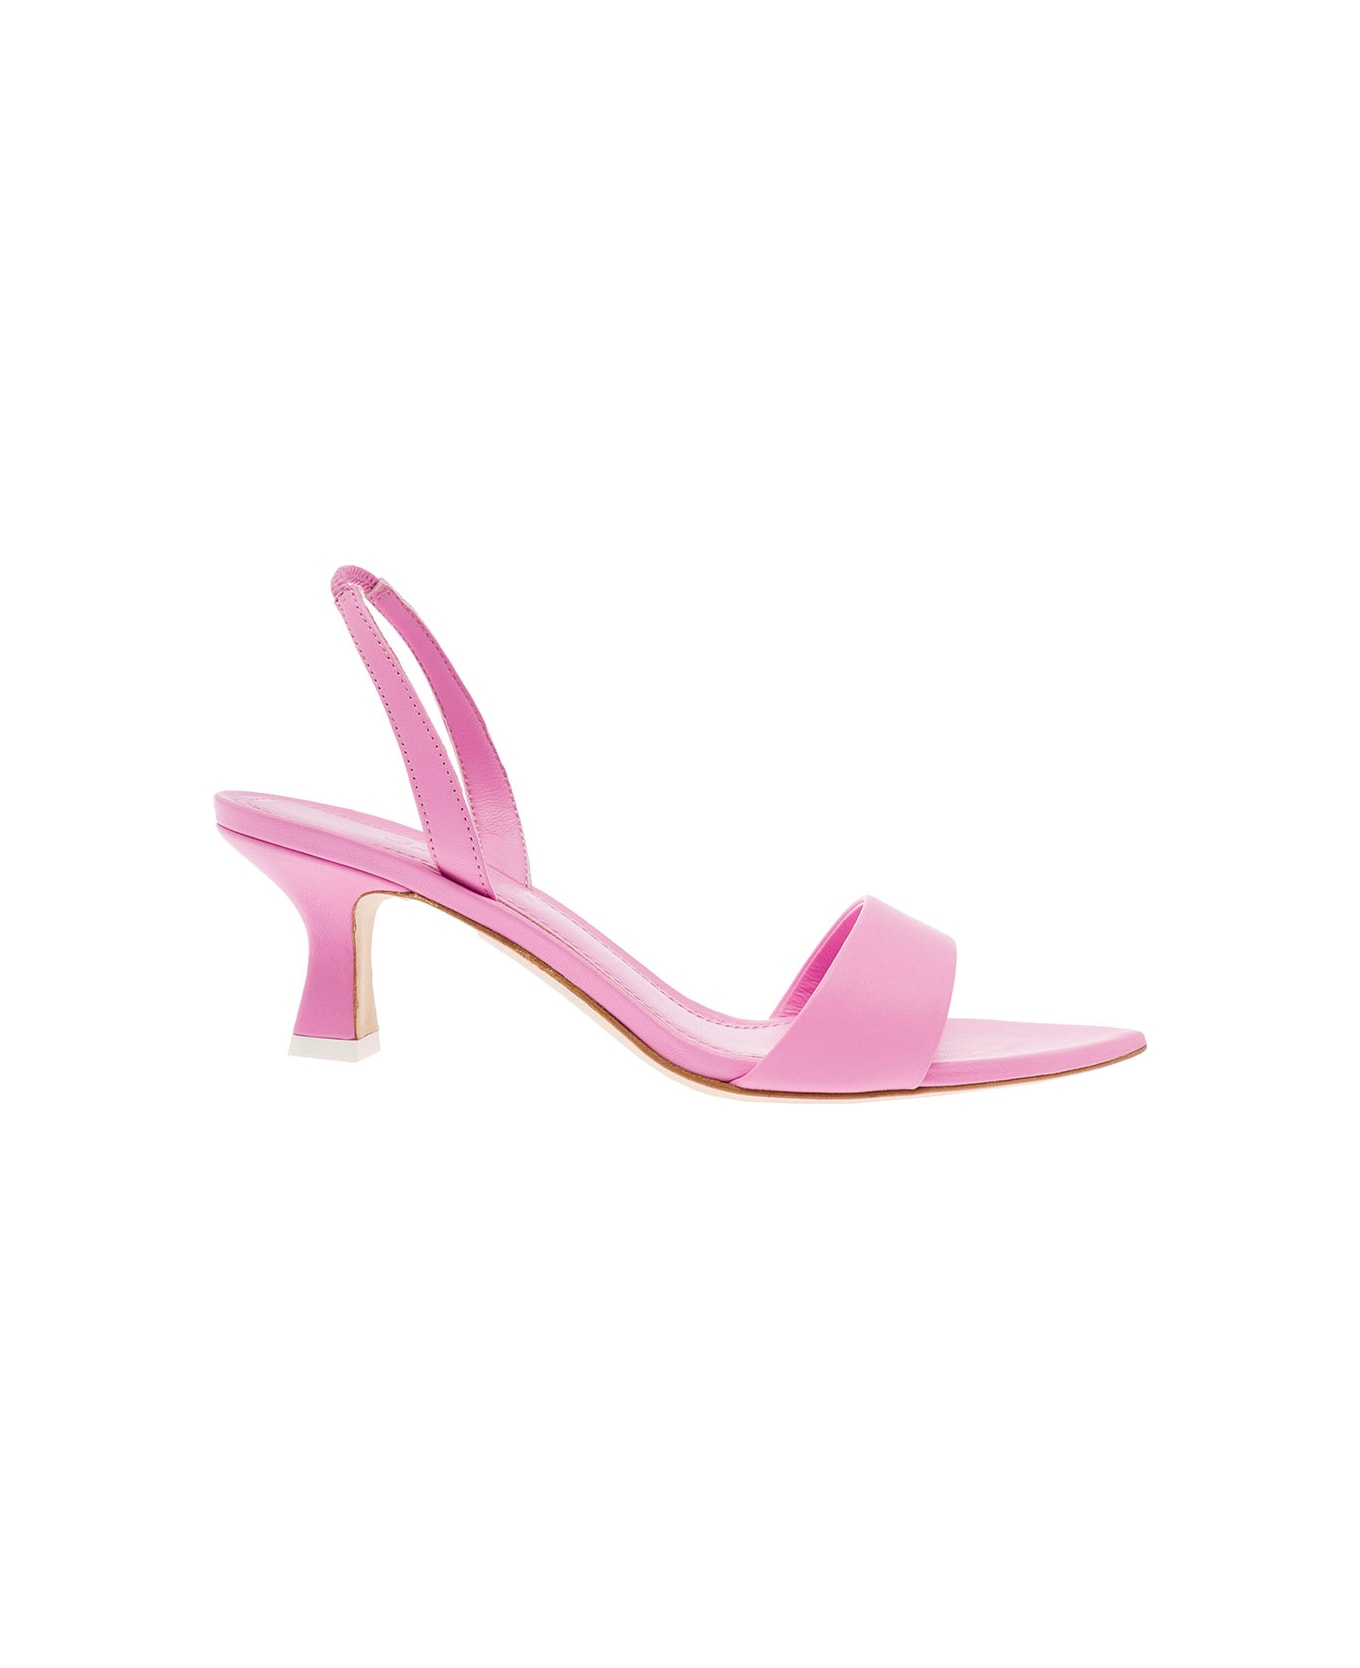 3JUIN 'eloise' Pink Andals With Rhinestone Embellishment And Spool Hight Heel In Viscose Blend Woman - Pink サンダル